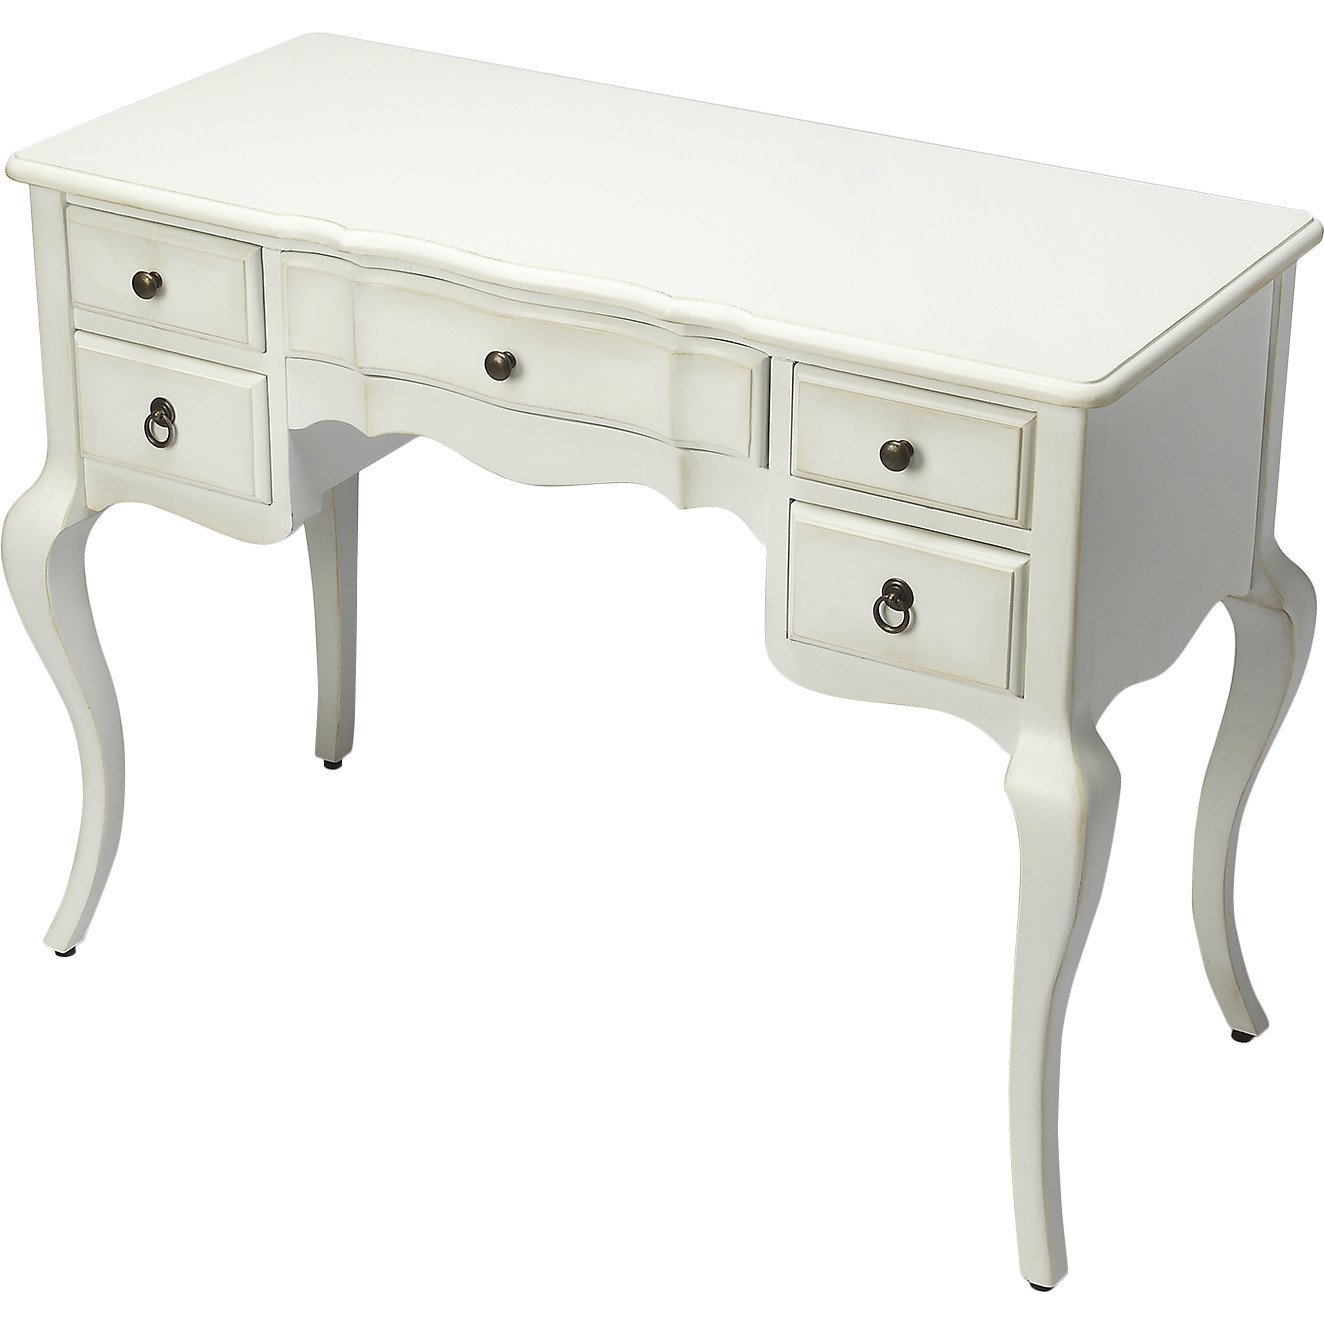 Butler Specialty furniture